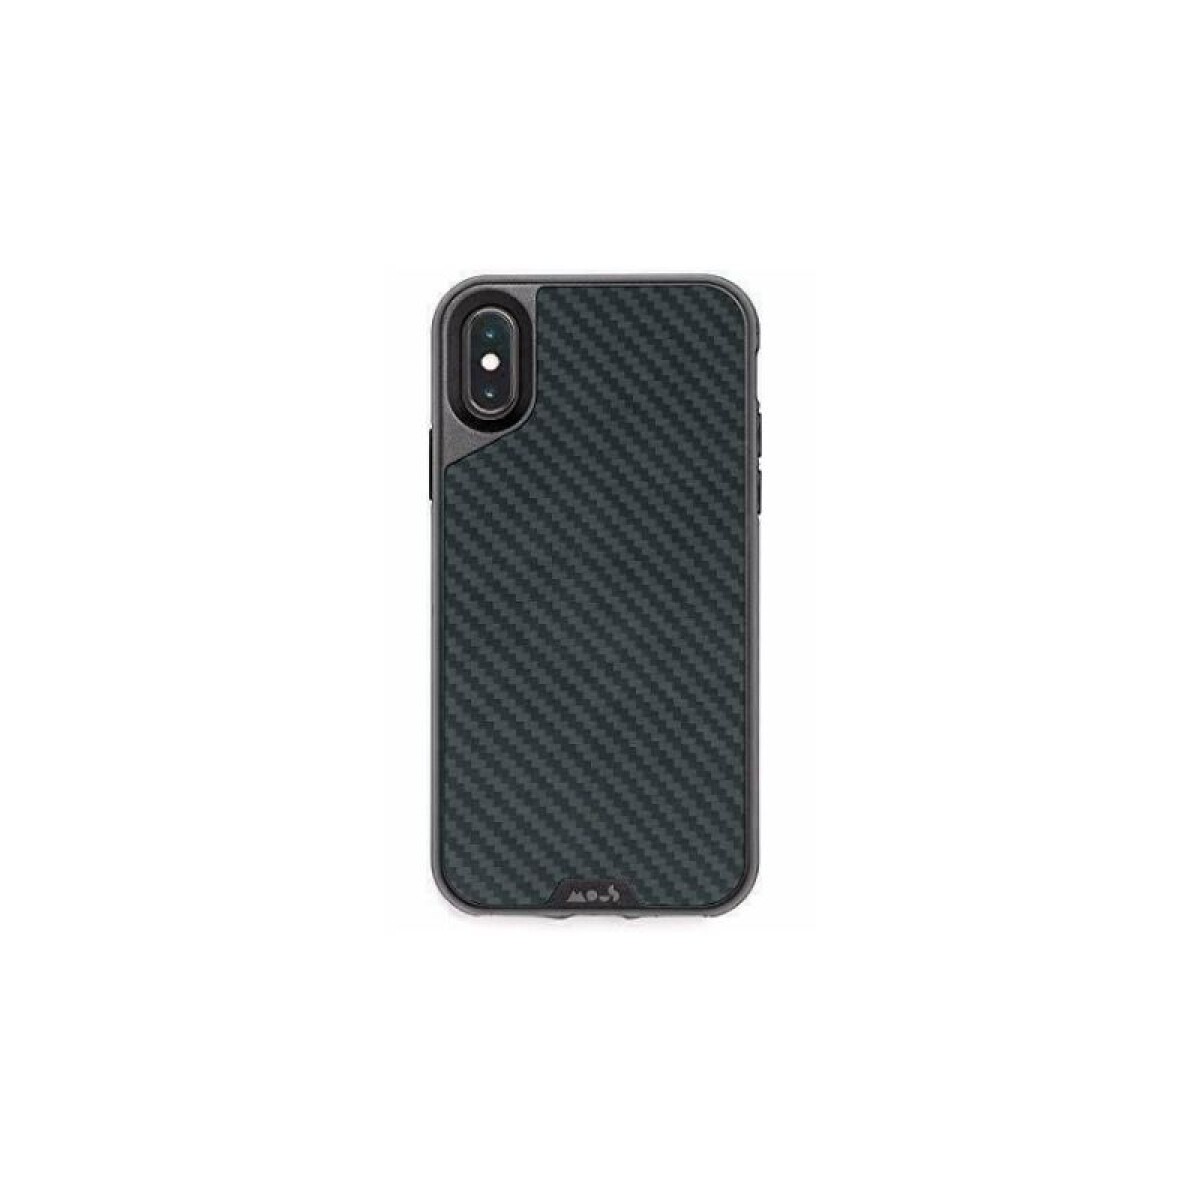 Protector Mous Limitless Carbono para Iphone X y XS 